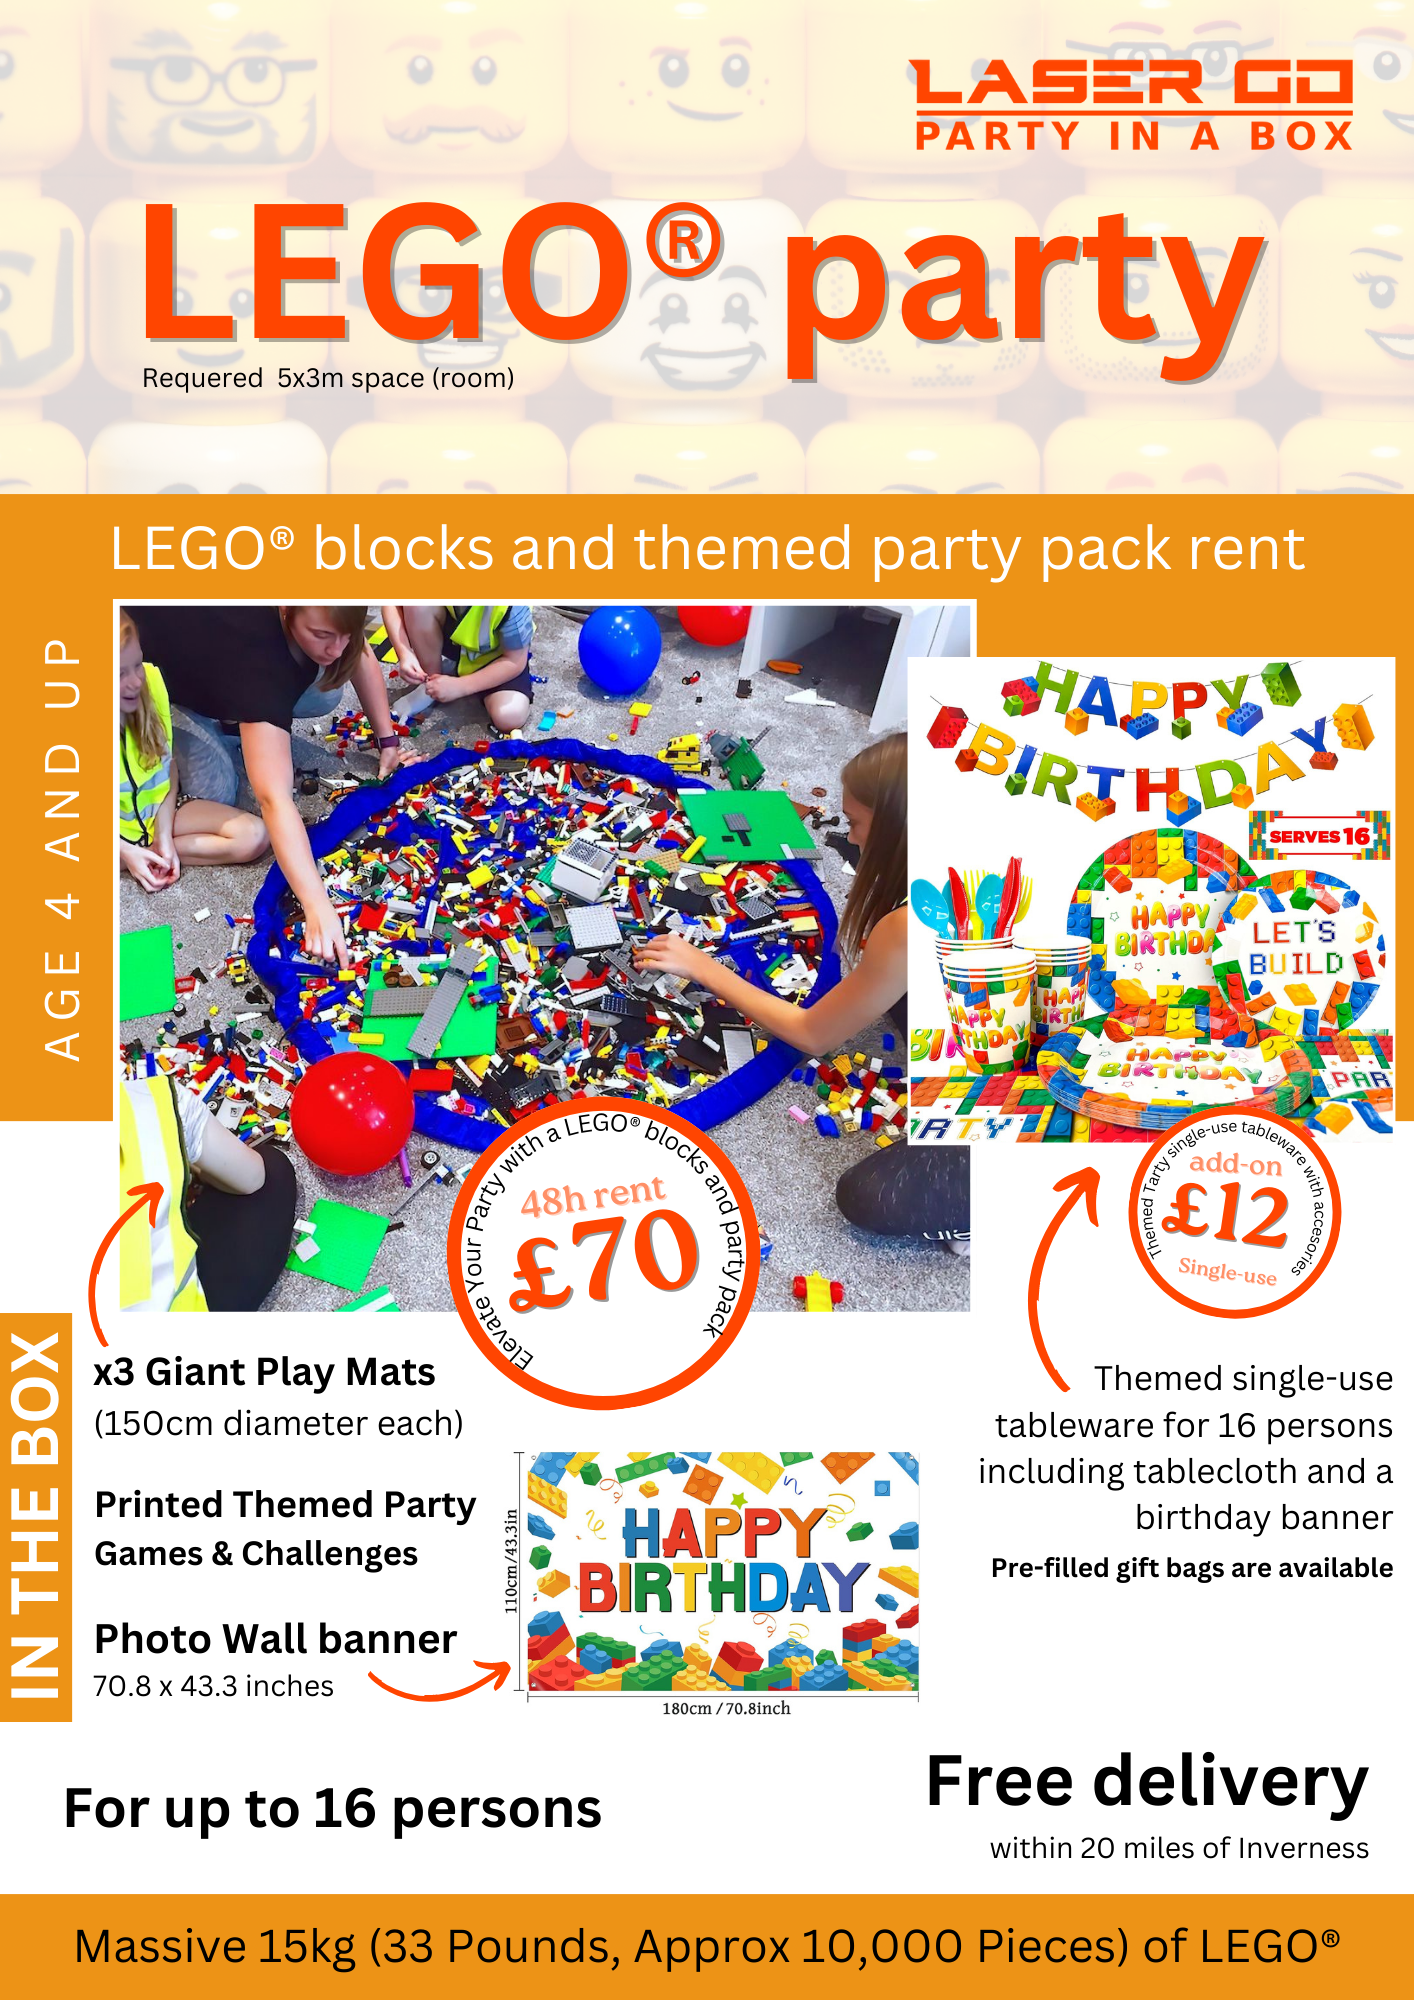 Ultimate LEGO® party - Party in a box hire